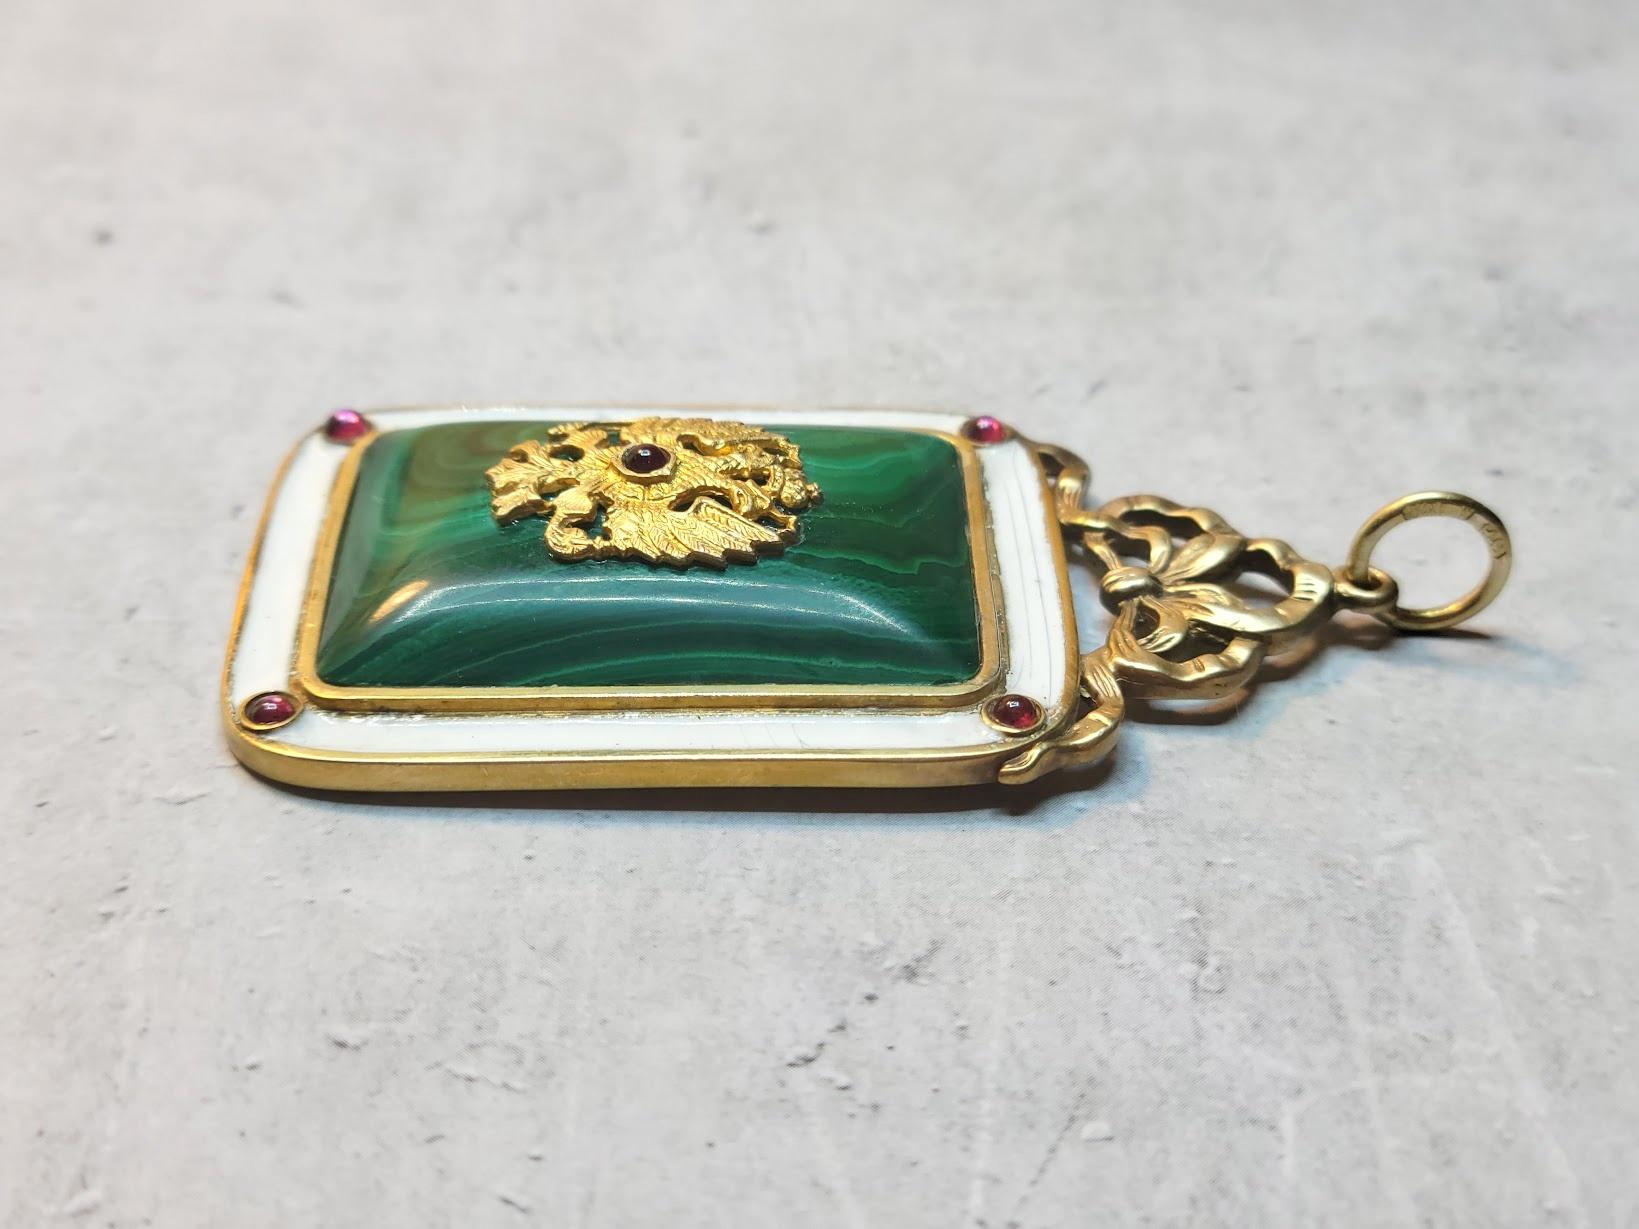 Russian Empire Imperial Silver Gilt Enamel Malachite Garnet Pendant With Coat Of Arms For Sale